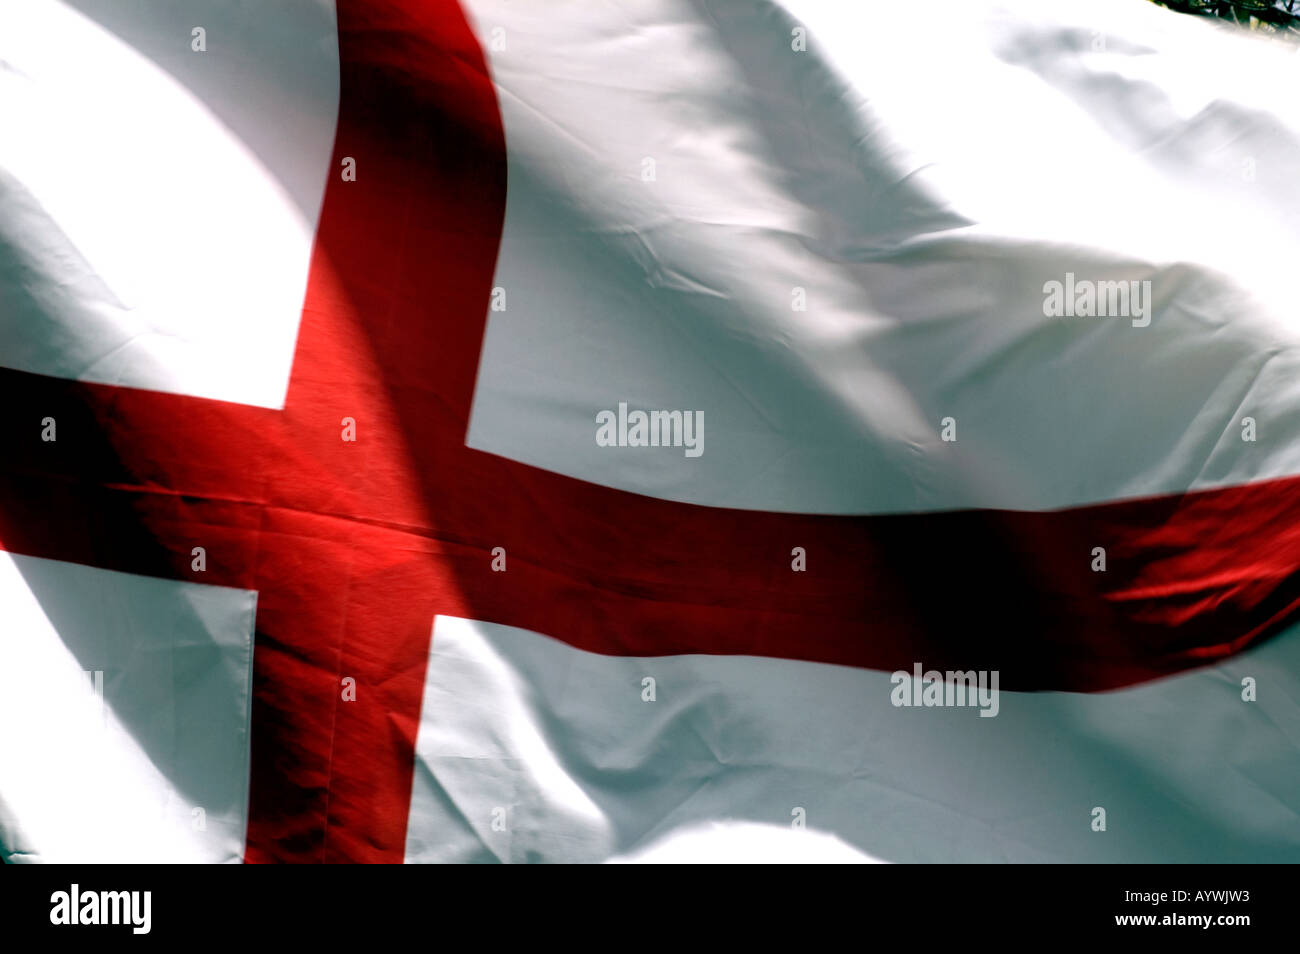 England flag with red cross on white background Stock Photo